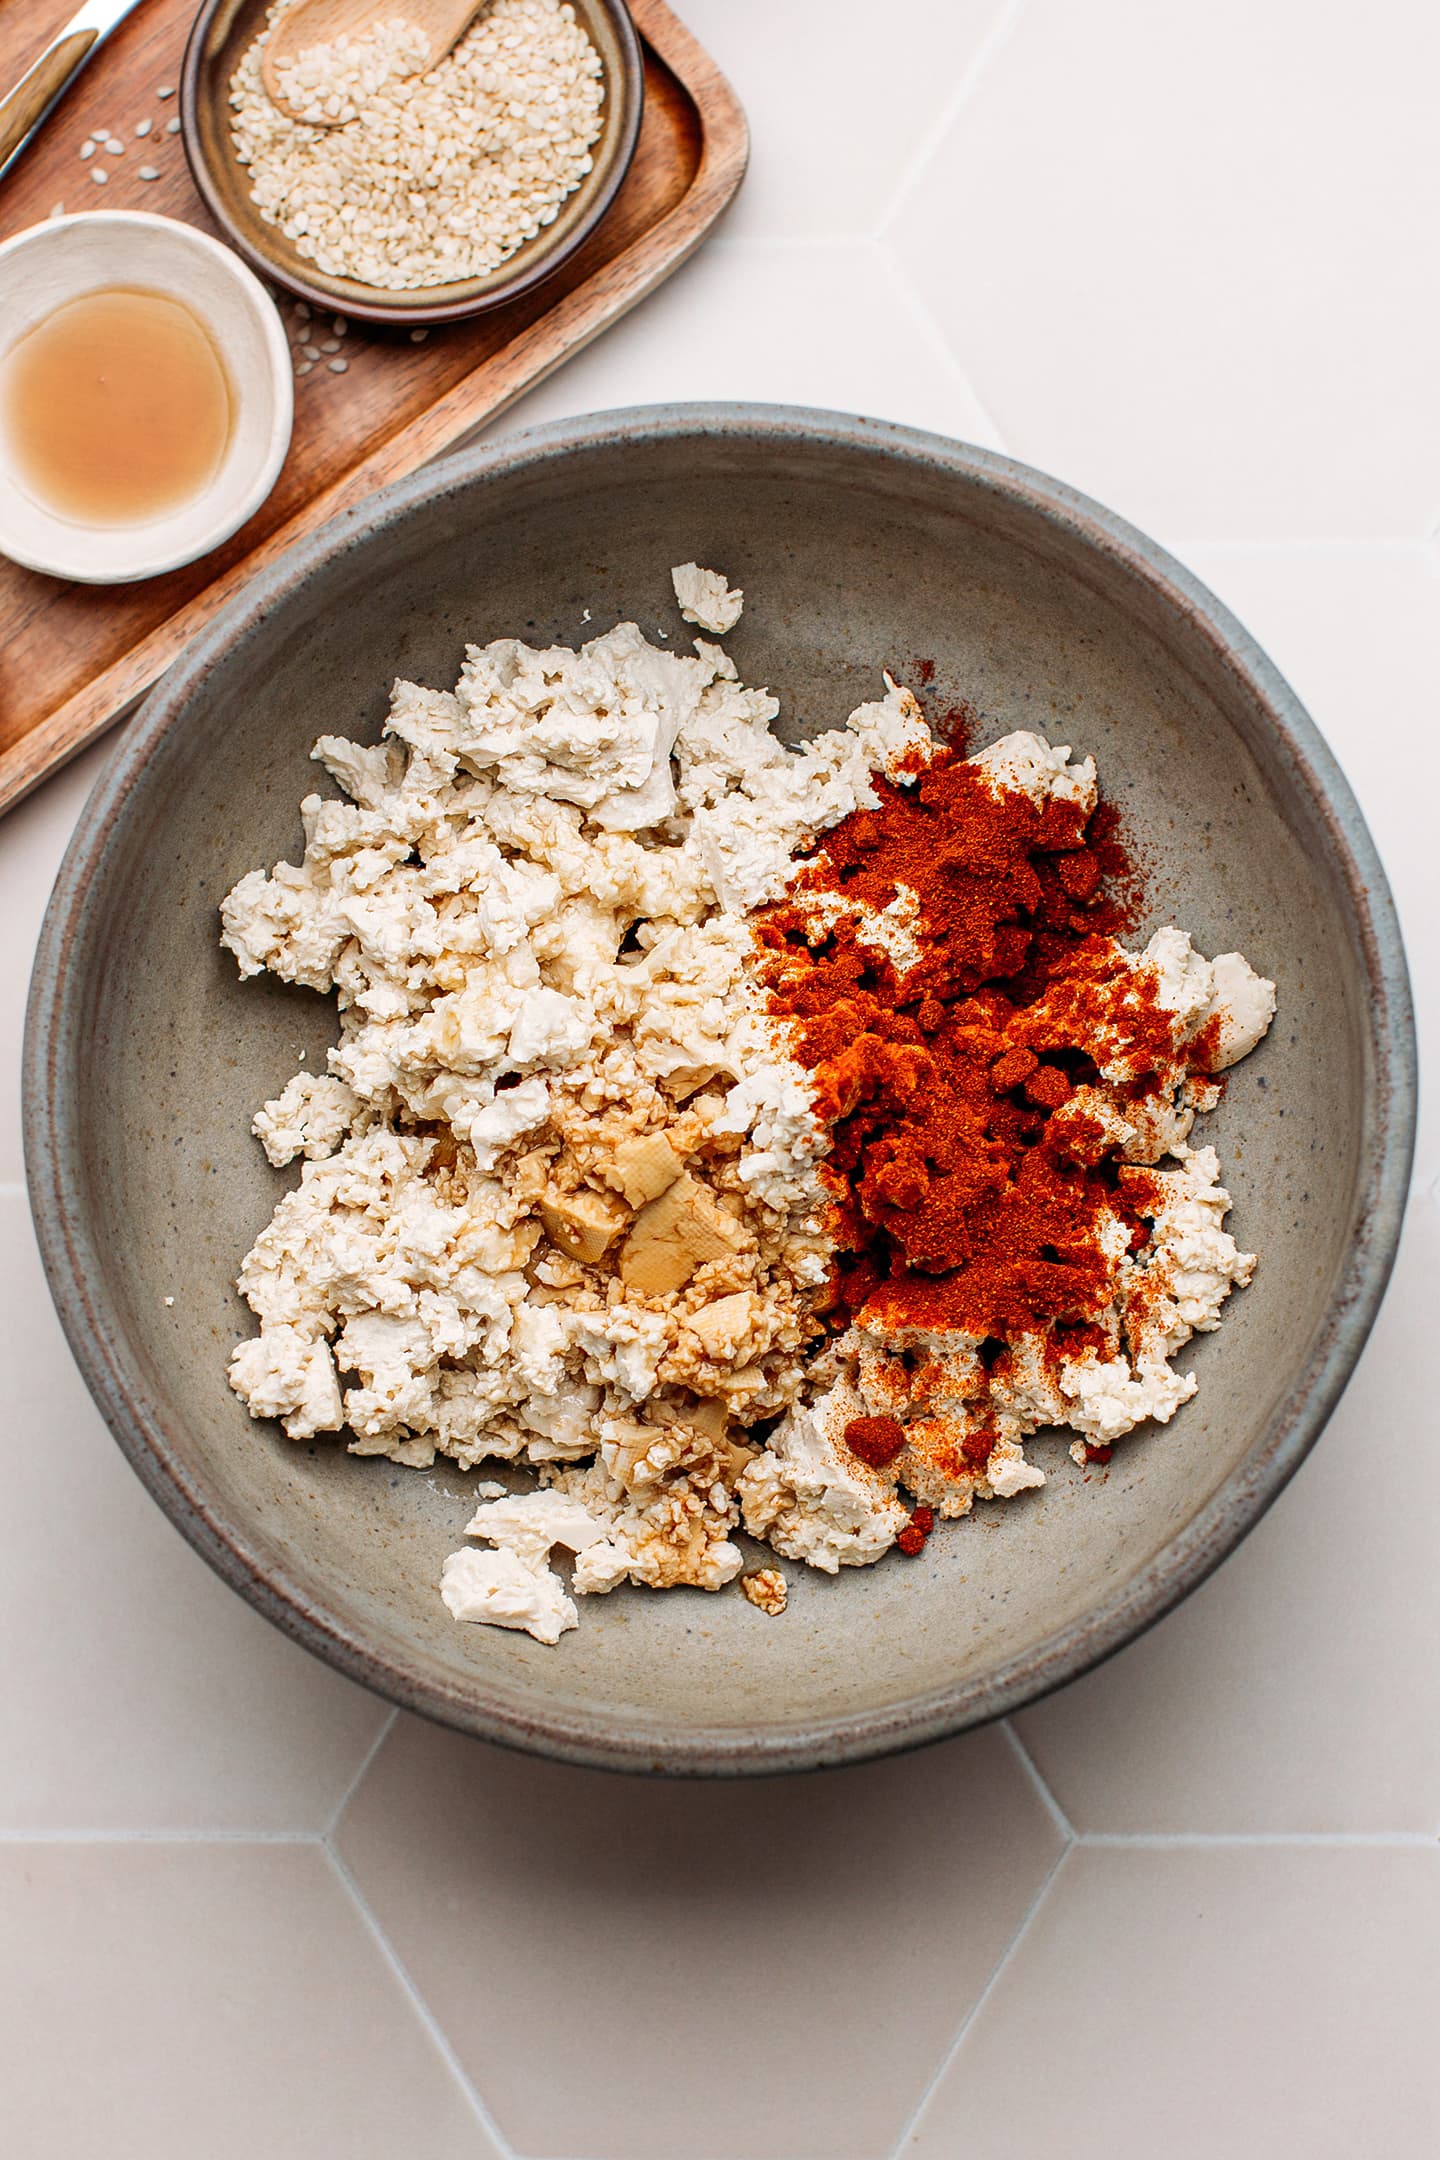 Scrambled tofu, smoked paprika, and soy sauce in a bowl.